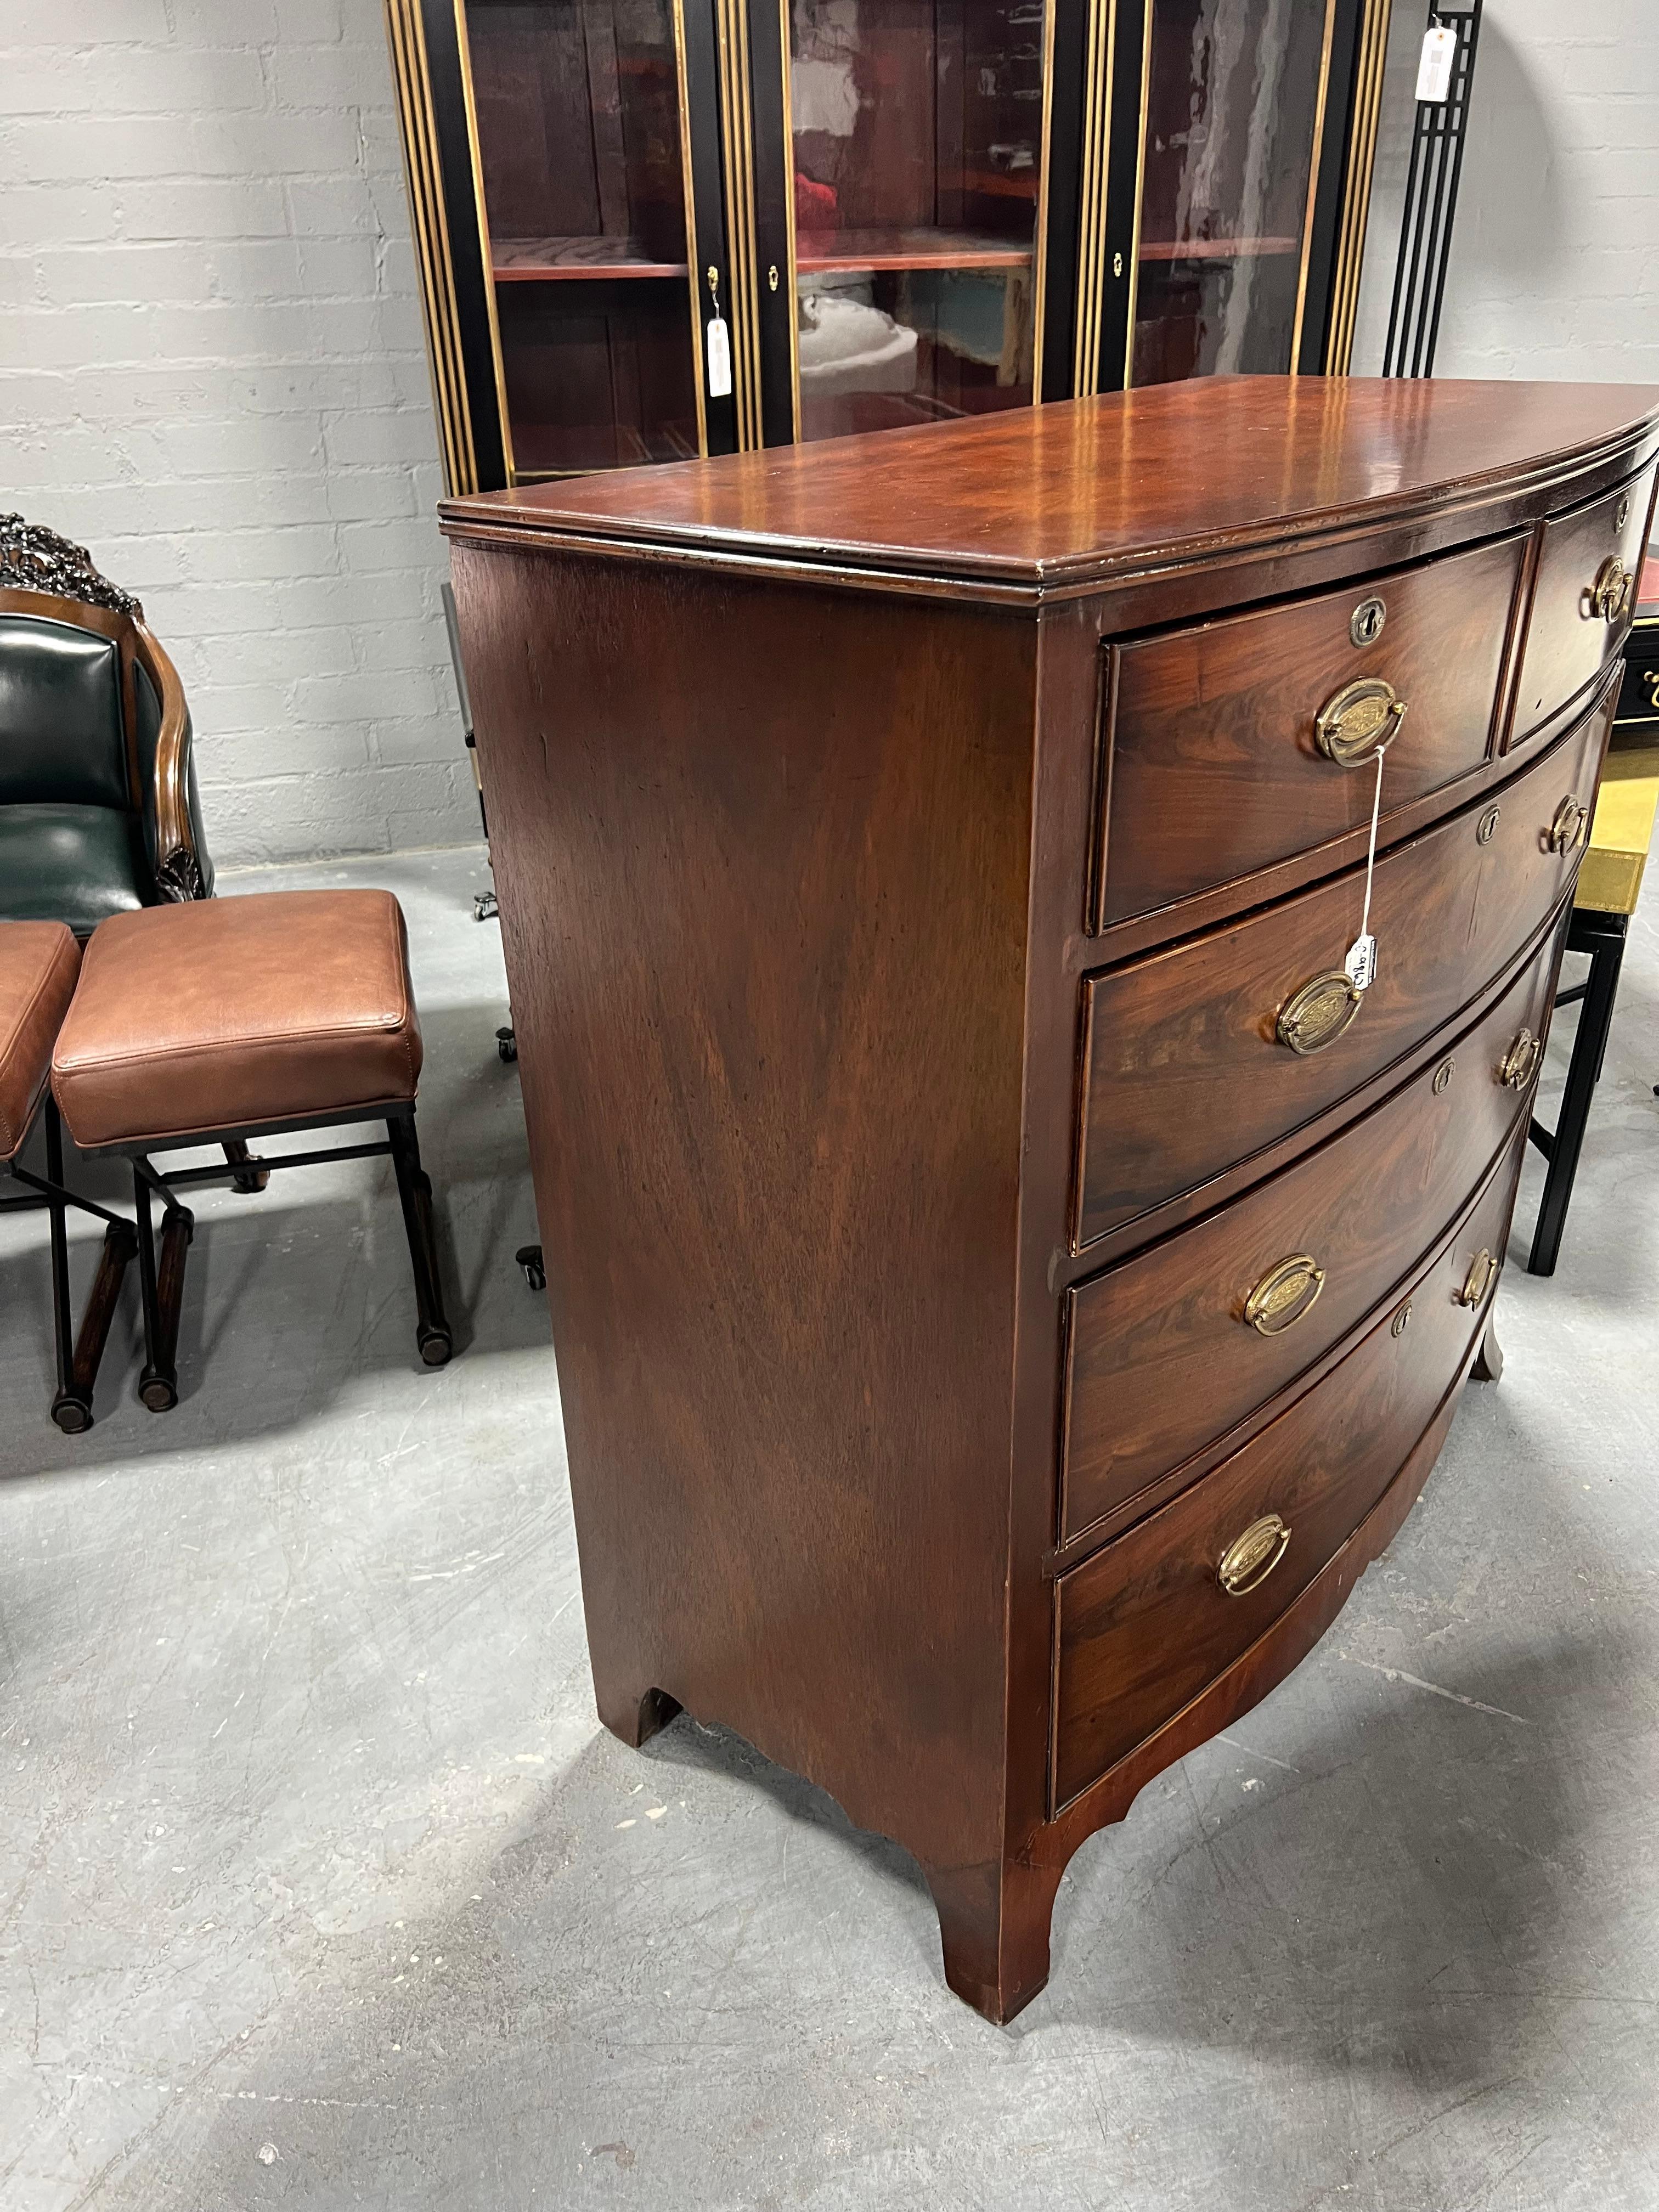 19th Century George III Mahogany Dresser with Flemish Veneers and Brass Details For Sale 12